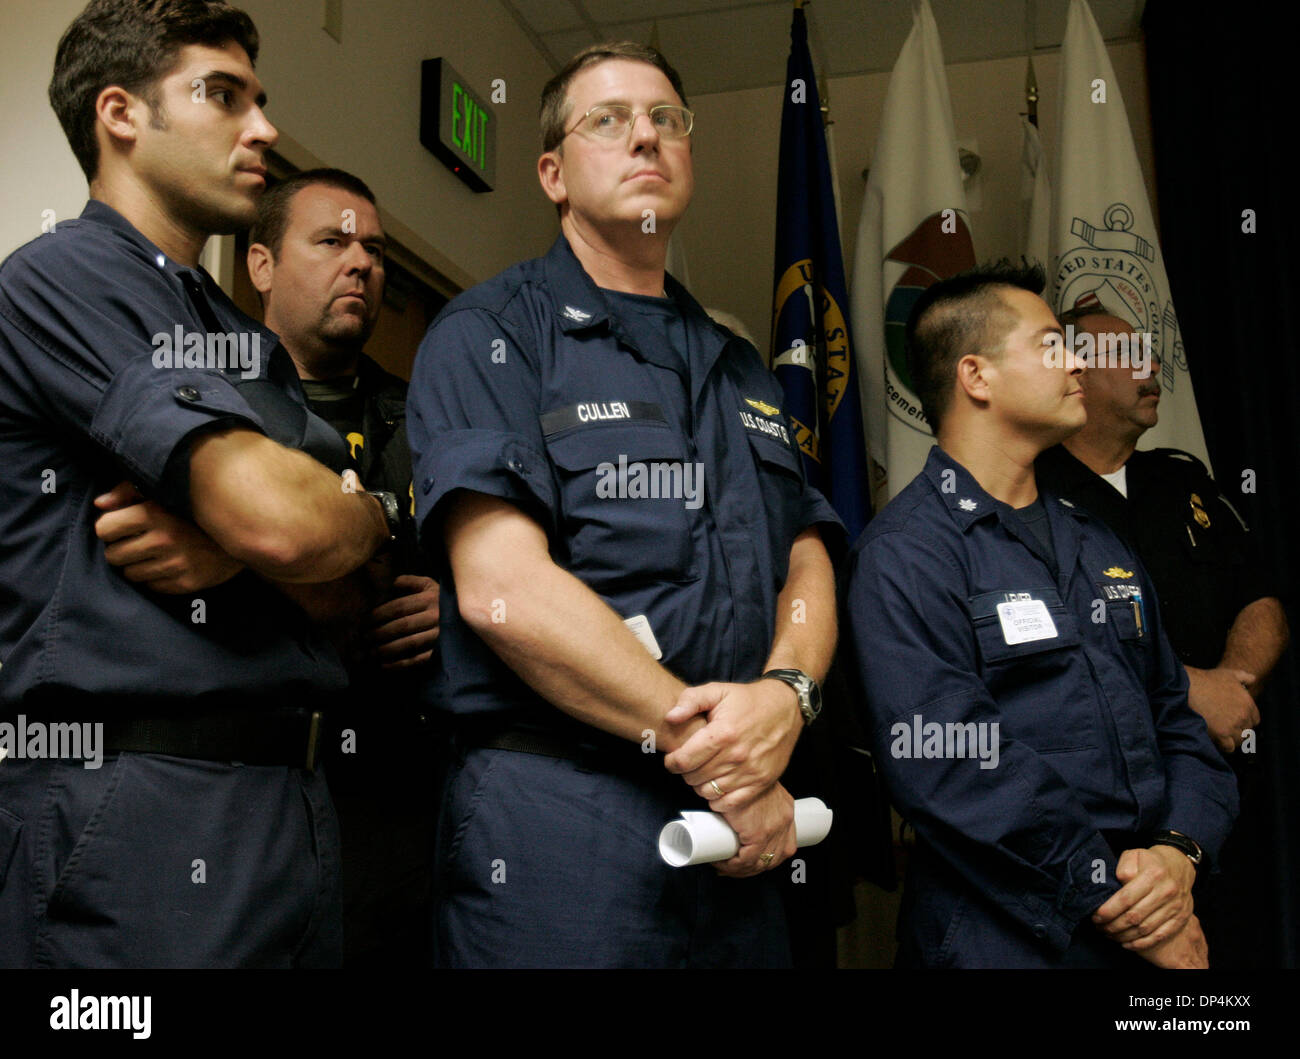 Aug 17, 2006; San Diego, CA, USA; Some of the members of the US Coast Guard that participated in the arrest on Monday August 14, 2006 in international waters off Baja California of  Francisco Javier Arellano Felix, the kingpin of the Arellano-Felix drug cartel. Arrested along with Arellano Felix were other members of the cartel during a deep-sea fishing trip.  Mandatory Credit: Pho Stock Photo